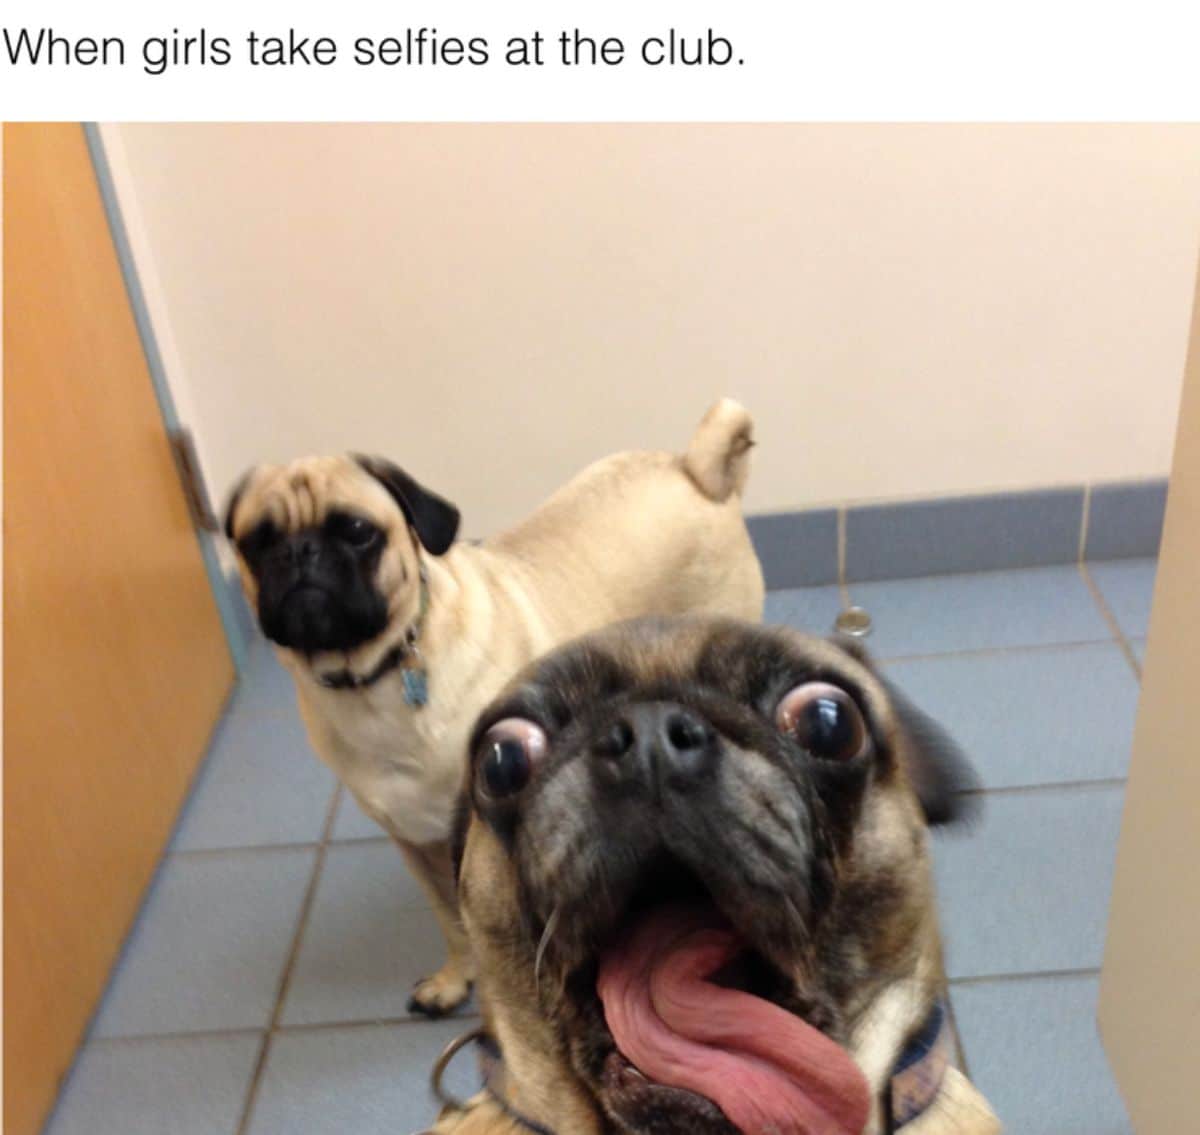 2 brown pugs with the one in the front close to the camera with the mouth open and tongue hanging out